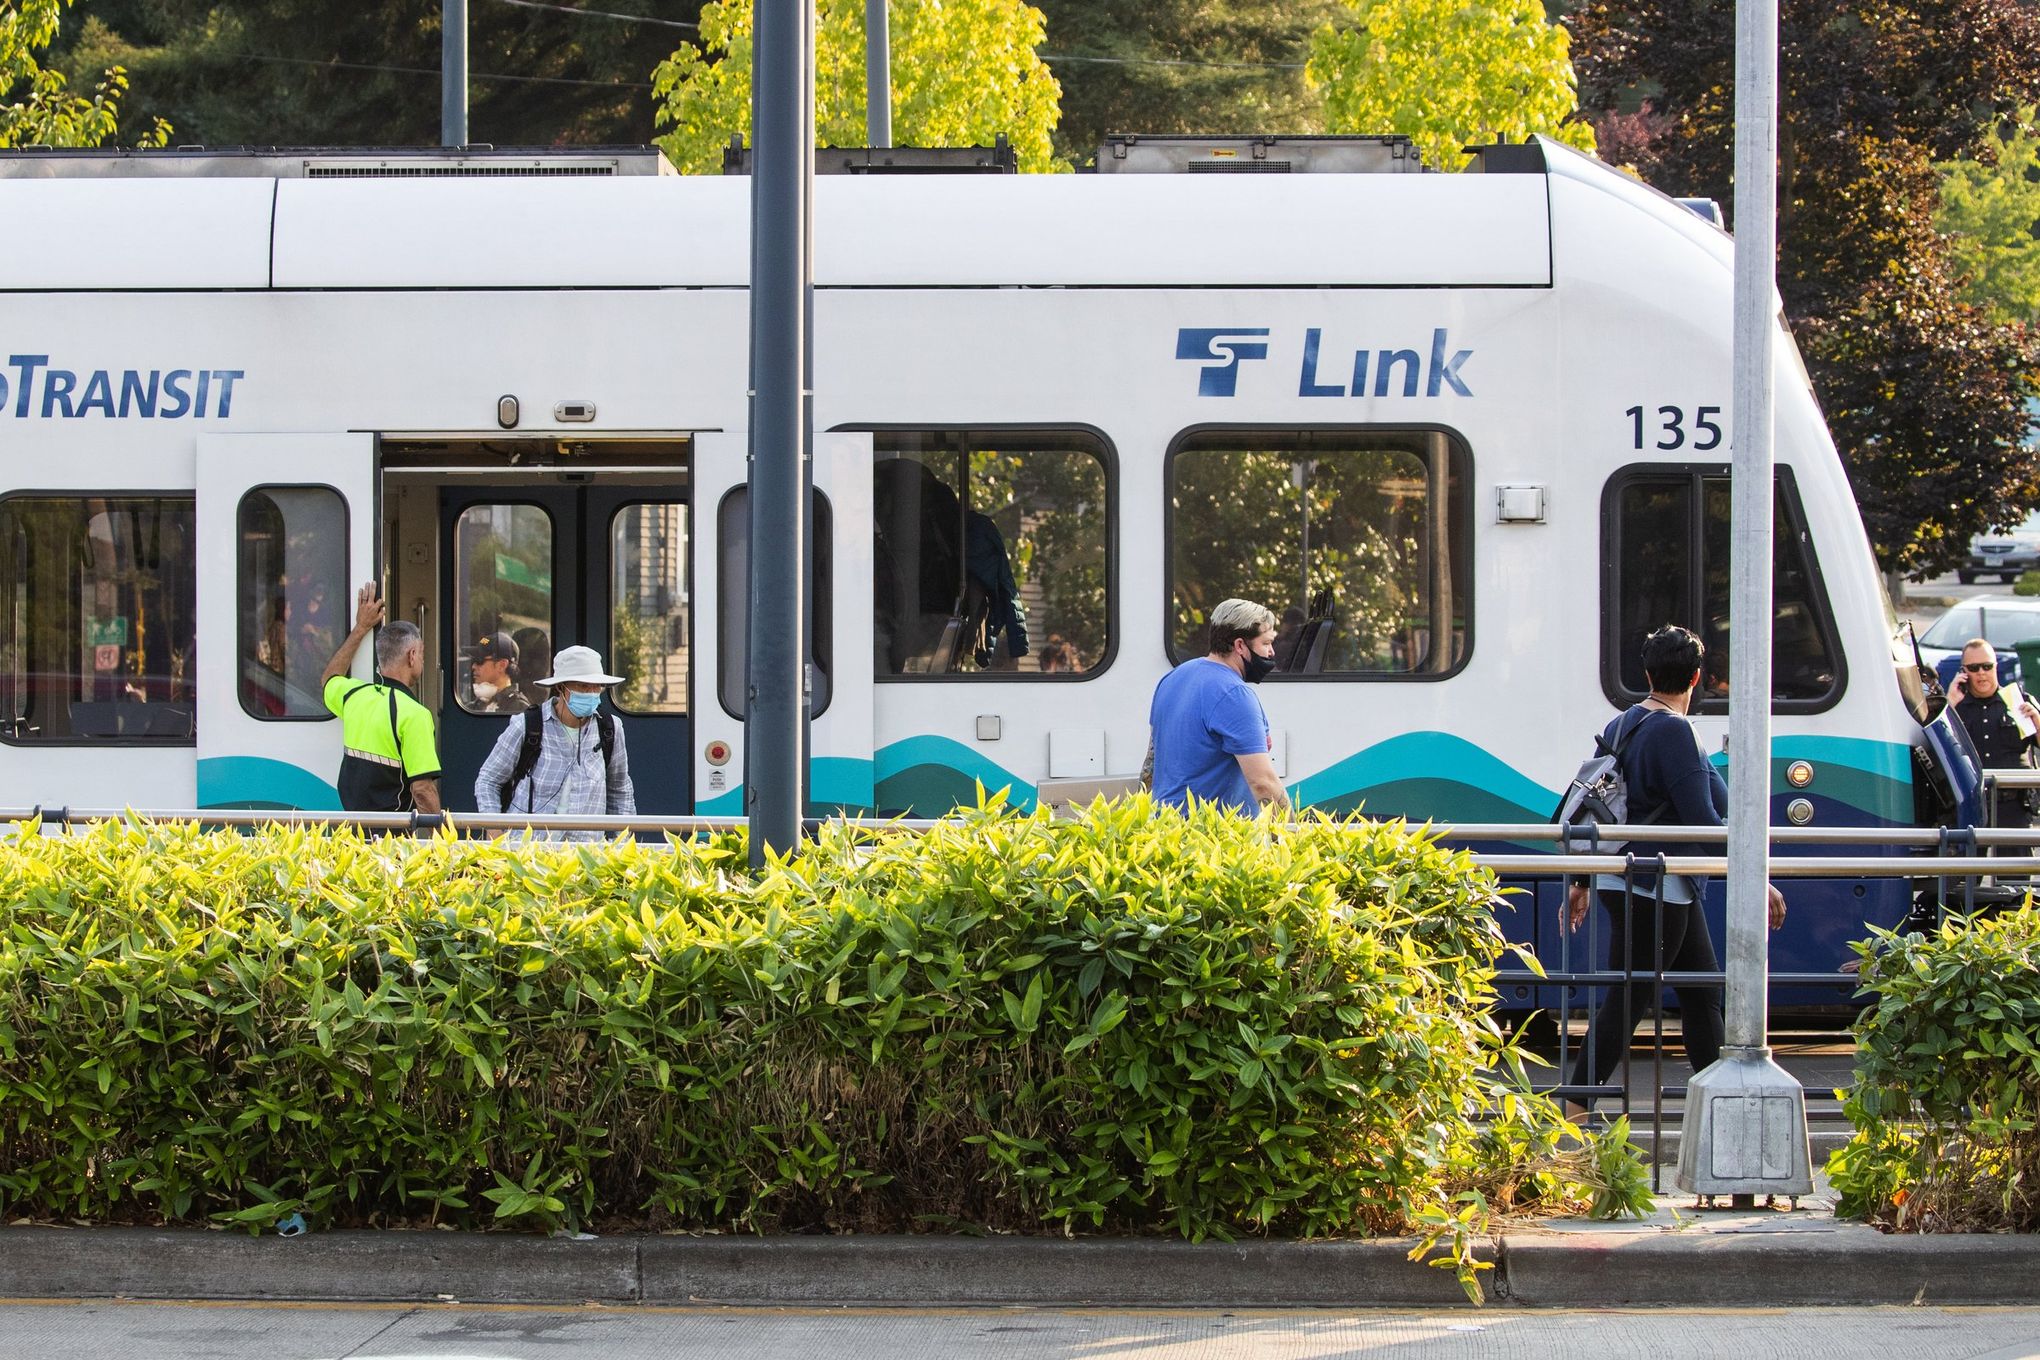 Power outage briefly halts light-rail trains in downtown Seattle